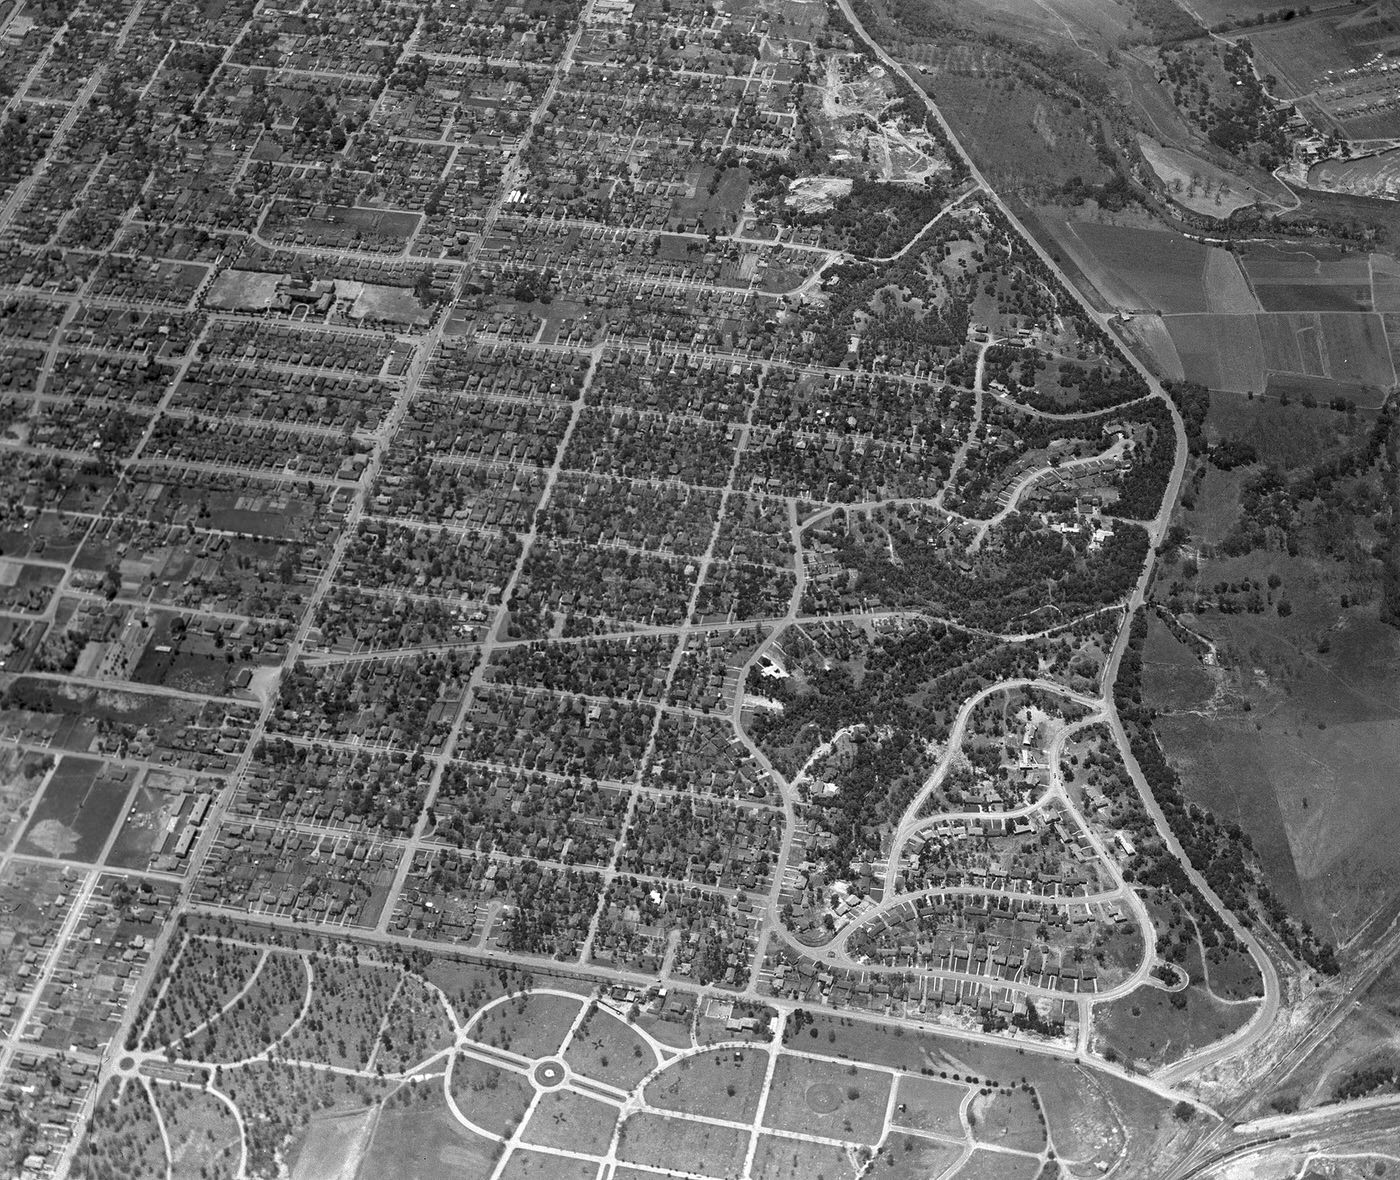 Aerial view of Fort Worth, Texas, Districts - Oakhurst neighborhood, 1949